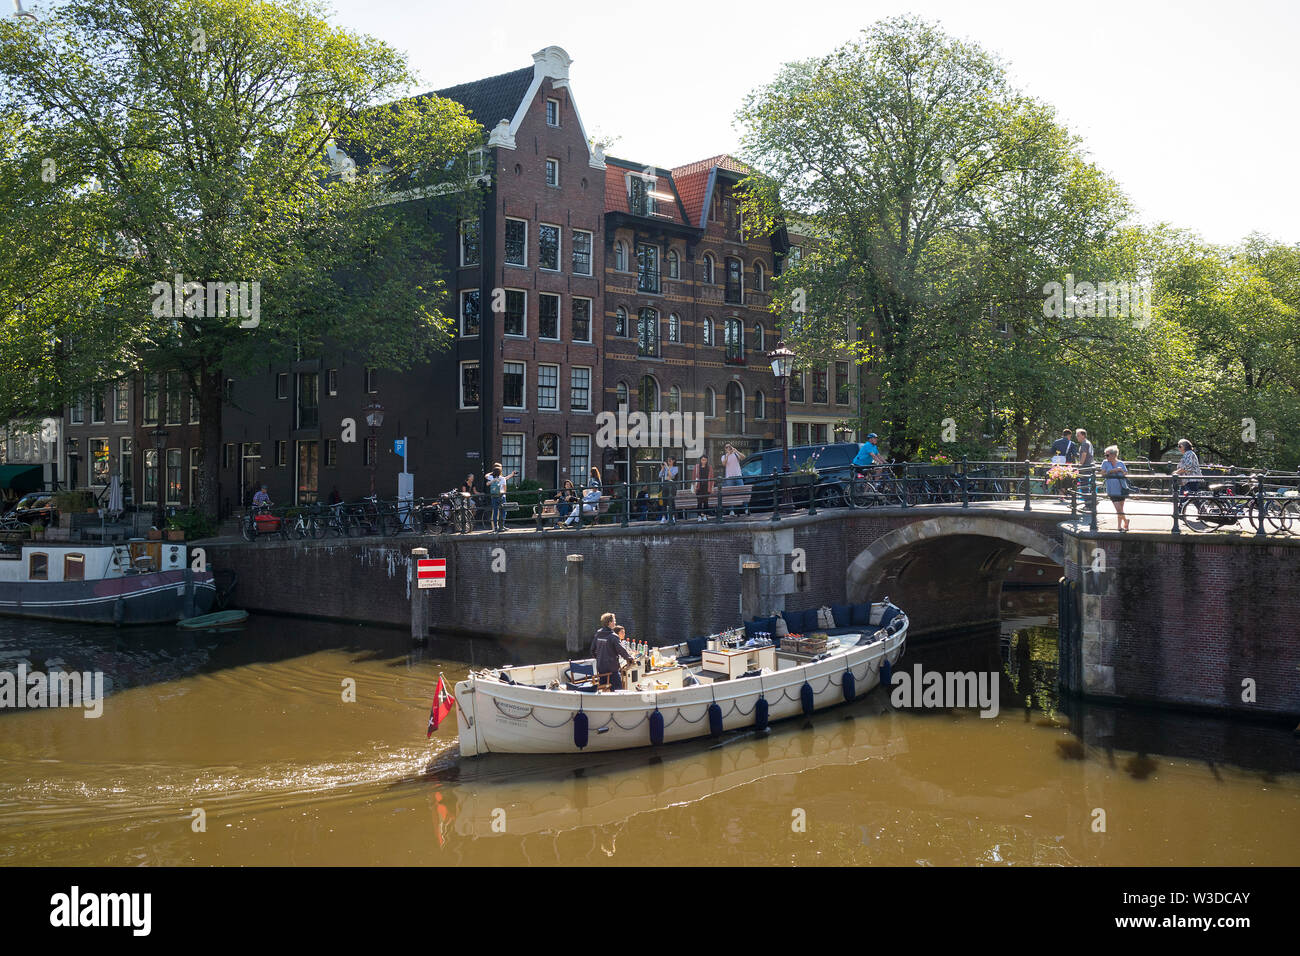 Amsterdam, Holland - June 22, 2019: Touring boat at the Brouwersgracht on a sunny day Stock Photo